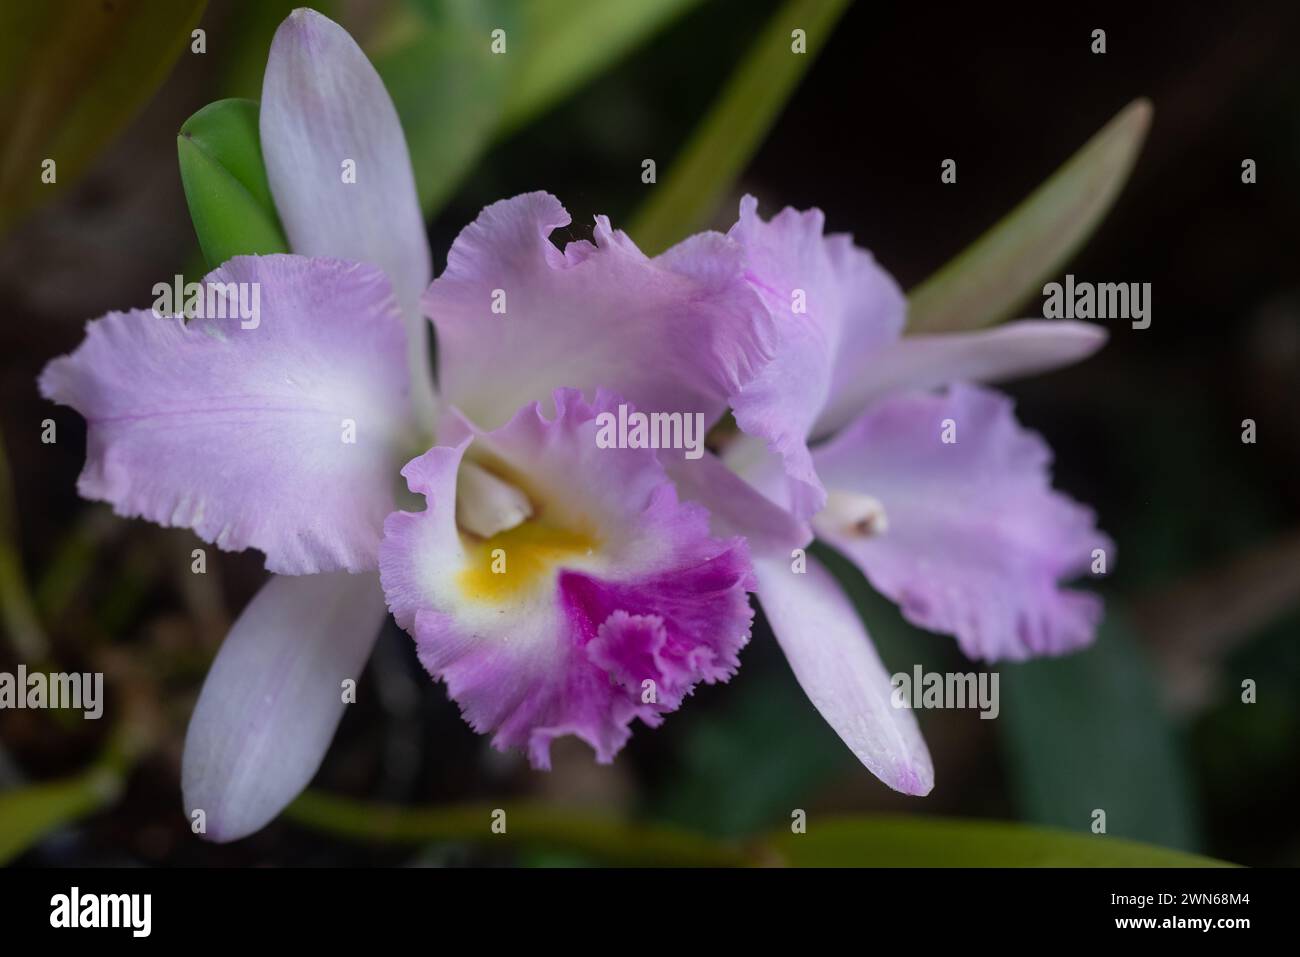 Closeup of lilac orchid known as Christmas orchid or Flor de Mayo, May flower Stock Photo